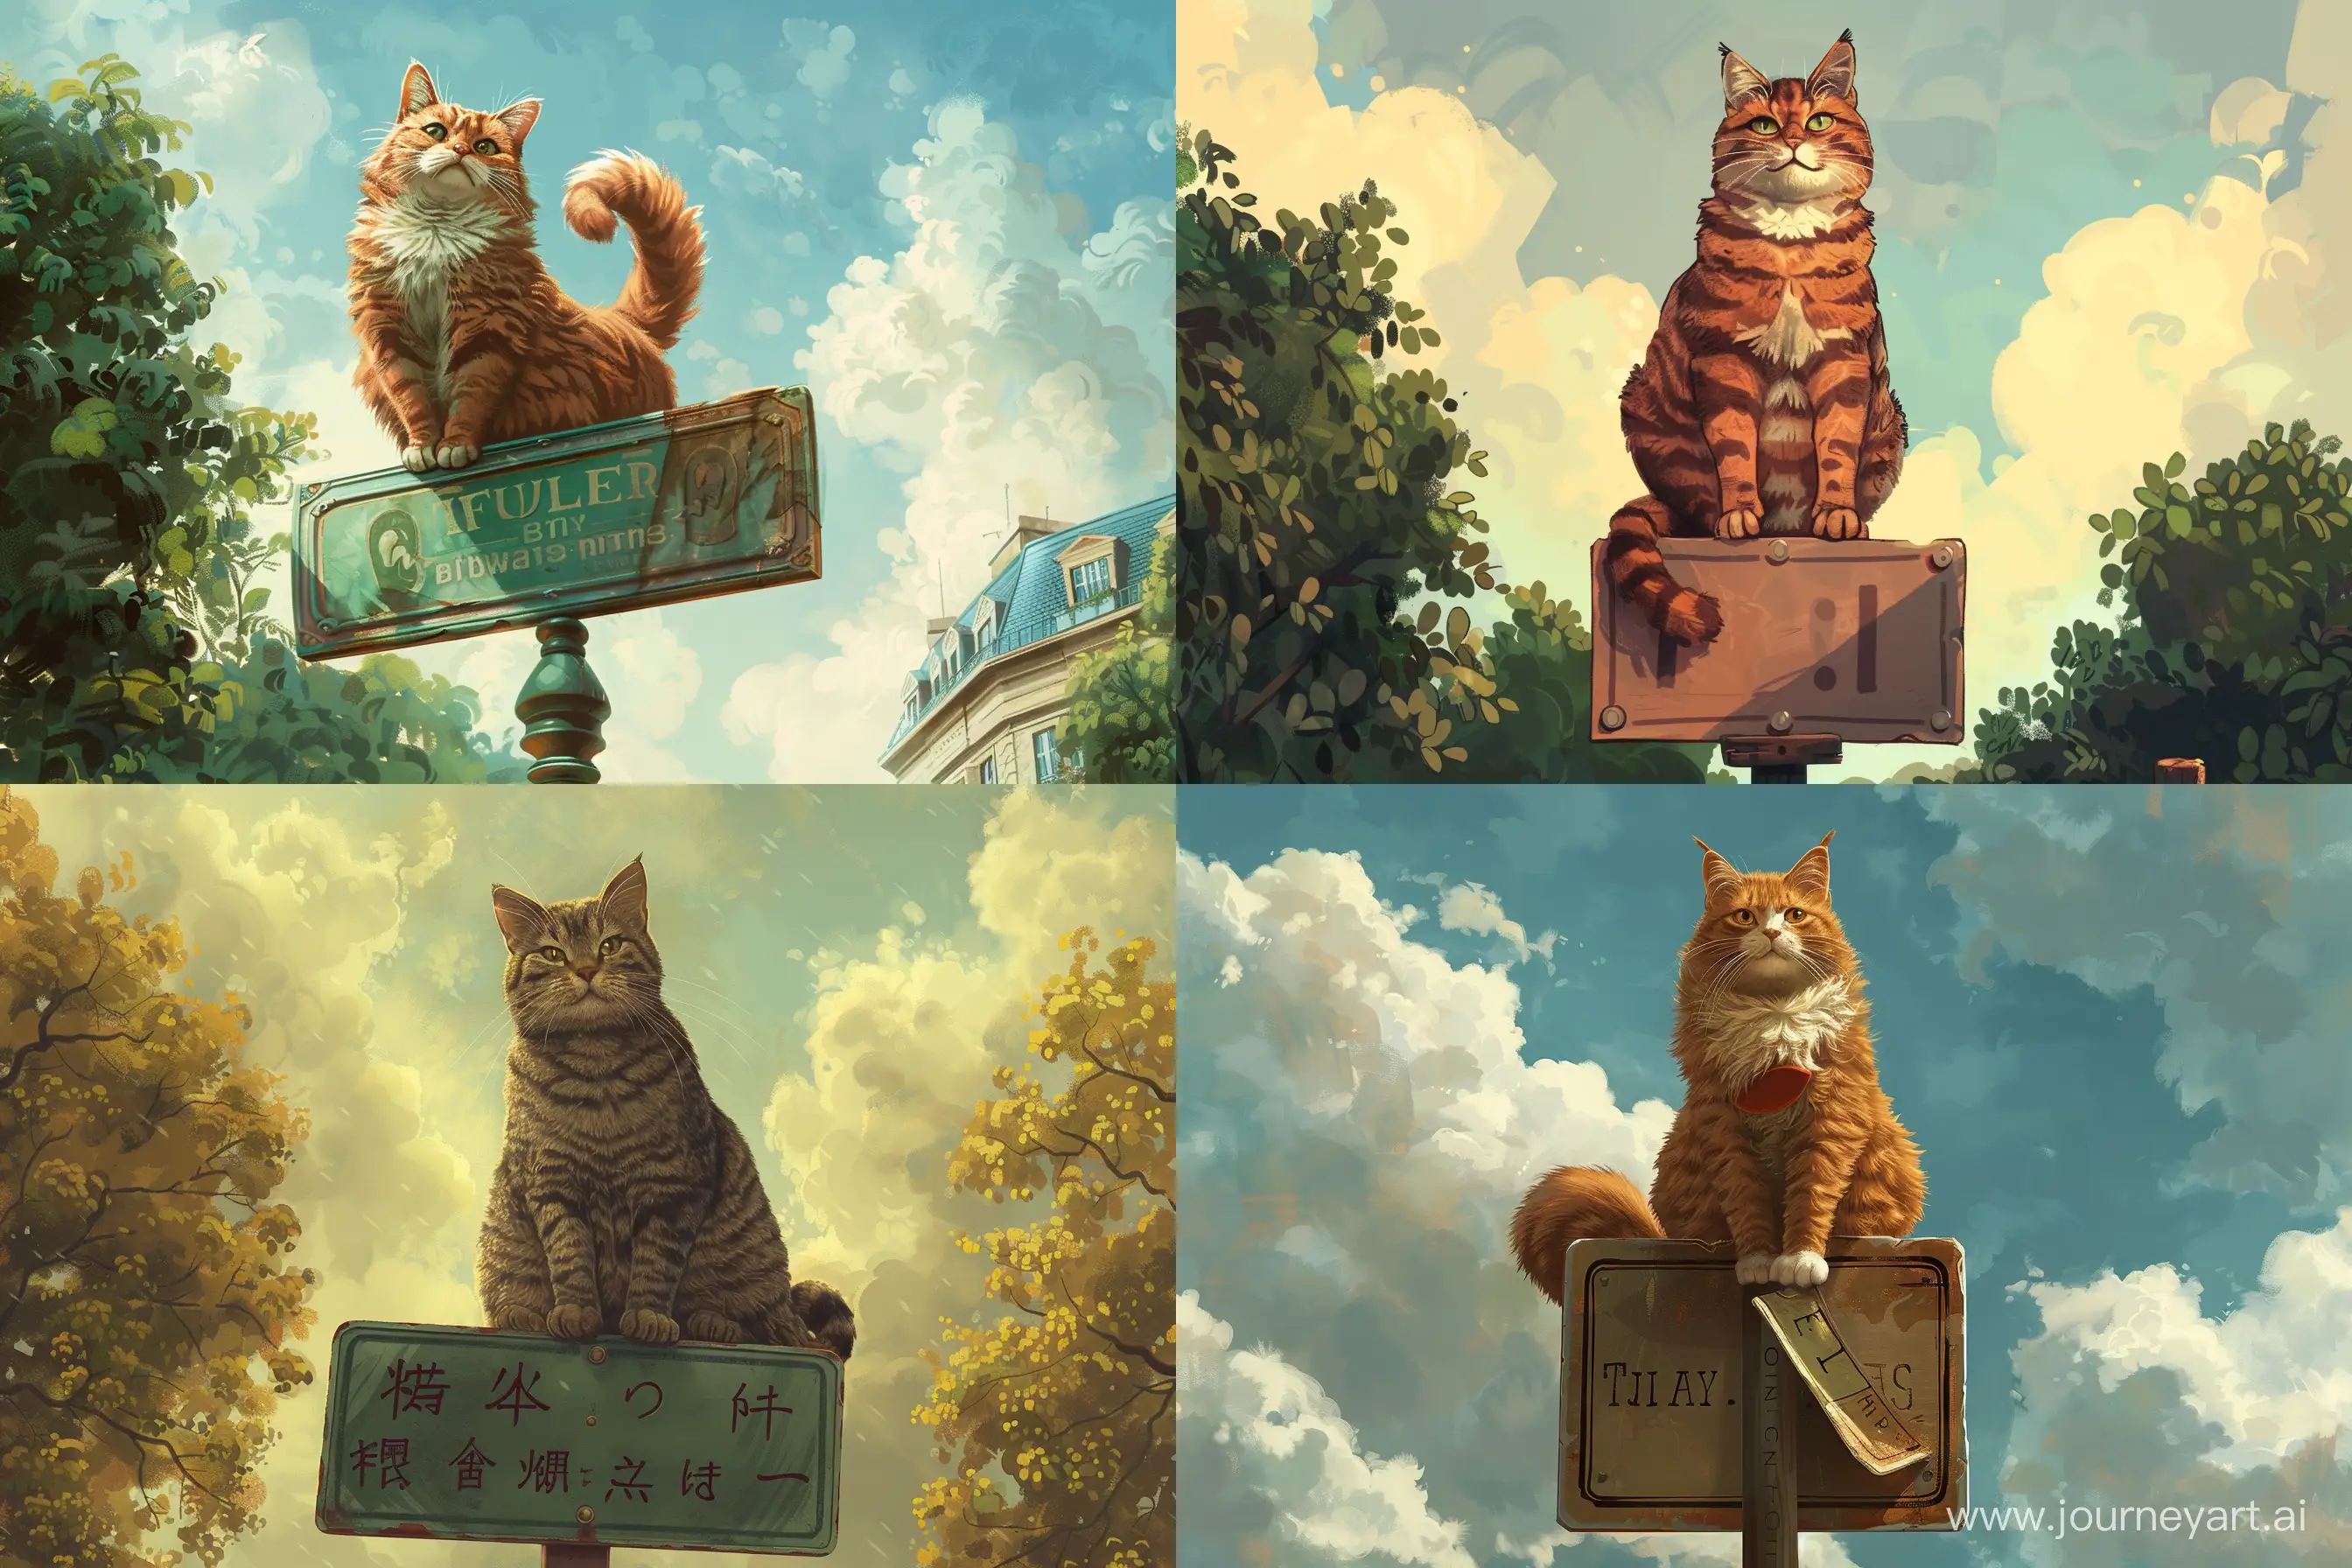 a picture of a cat sitting on top of a sign, a storybook illustration by Fuller Potter, shutterstock contest winner, mail art, storybook illustration, official art, concept art --ar 3:2